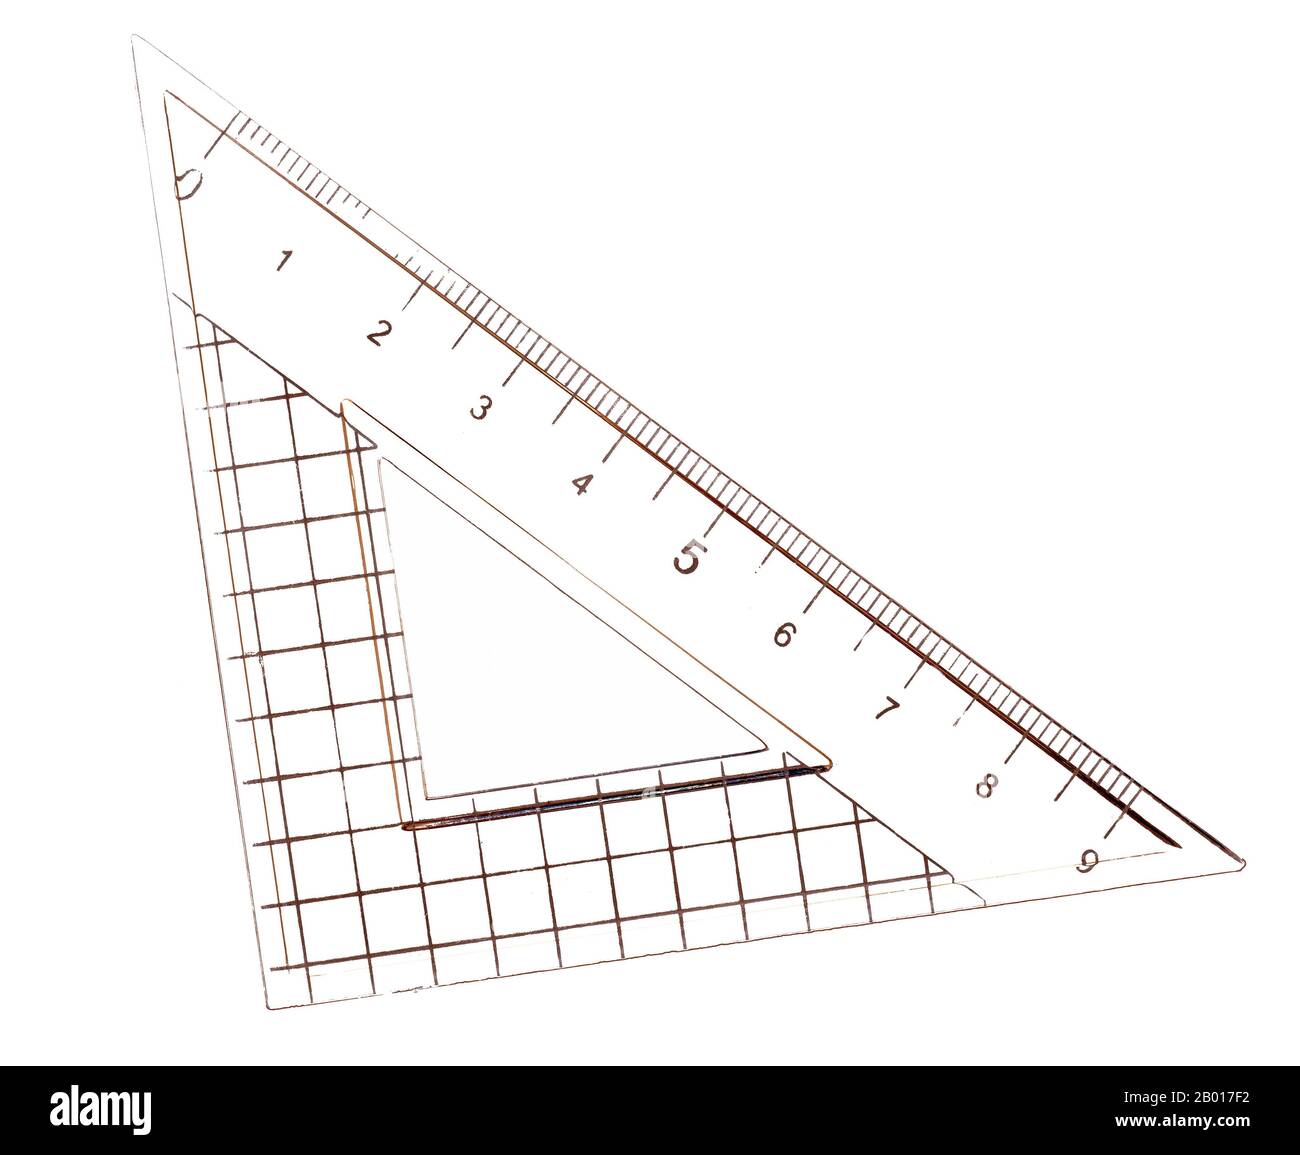 Old school maths equipment. Set square triangle used in engineering and technical drawing. Plastic. Isolated on white. Stock Photo